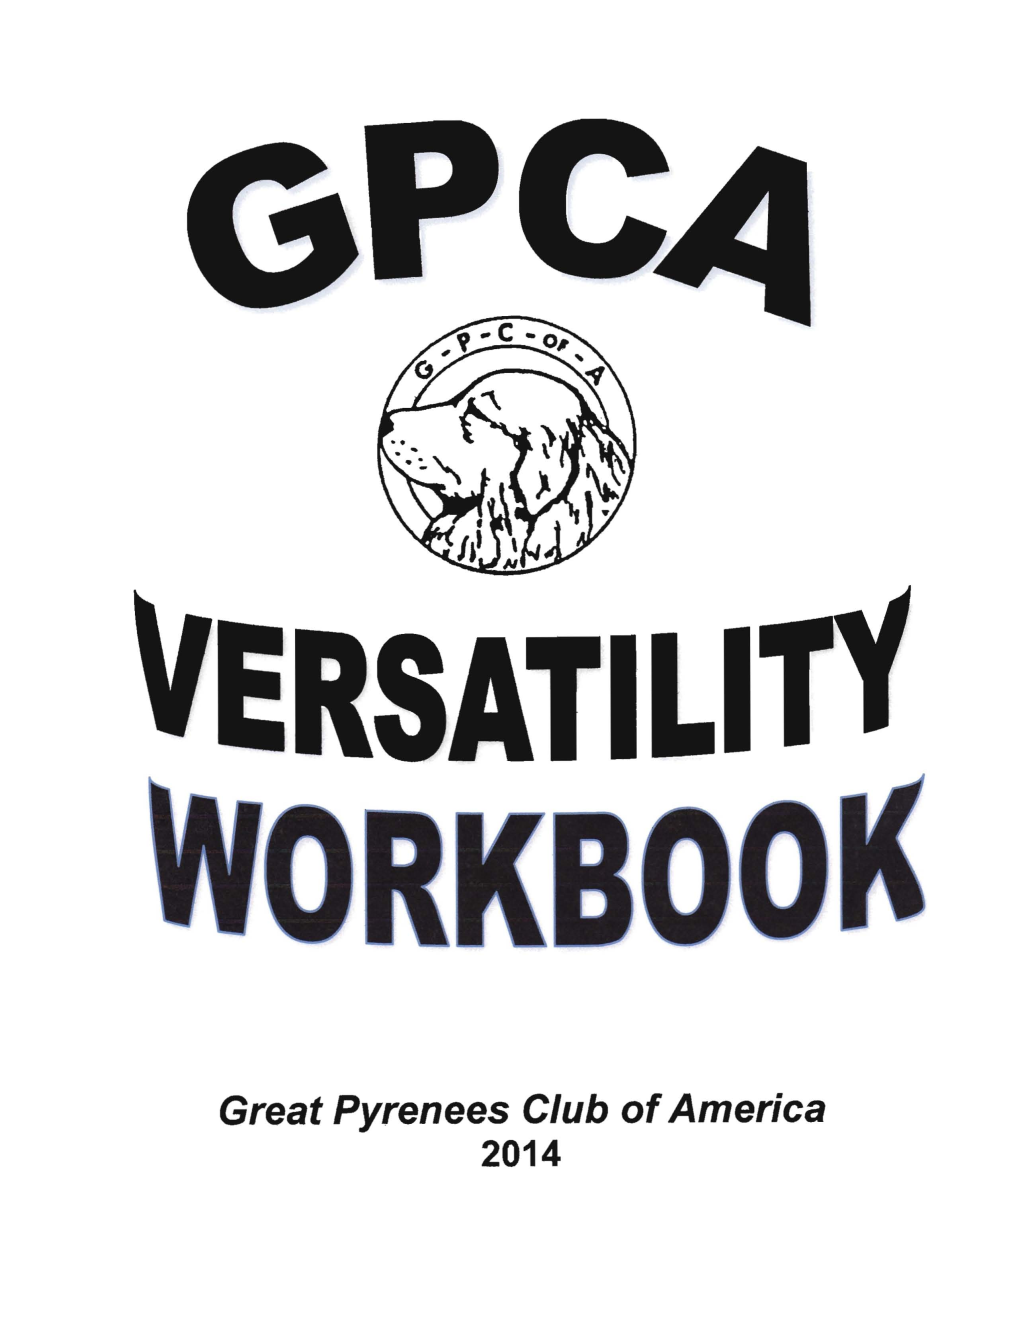 Versatility Workbook Or Downloading the Pertinent Pages from the Versatility Section Under Events/Activities on the GPCA Website